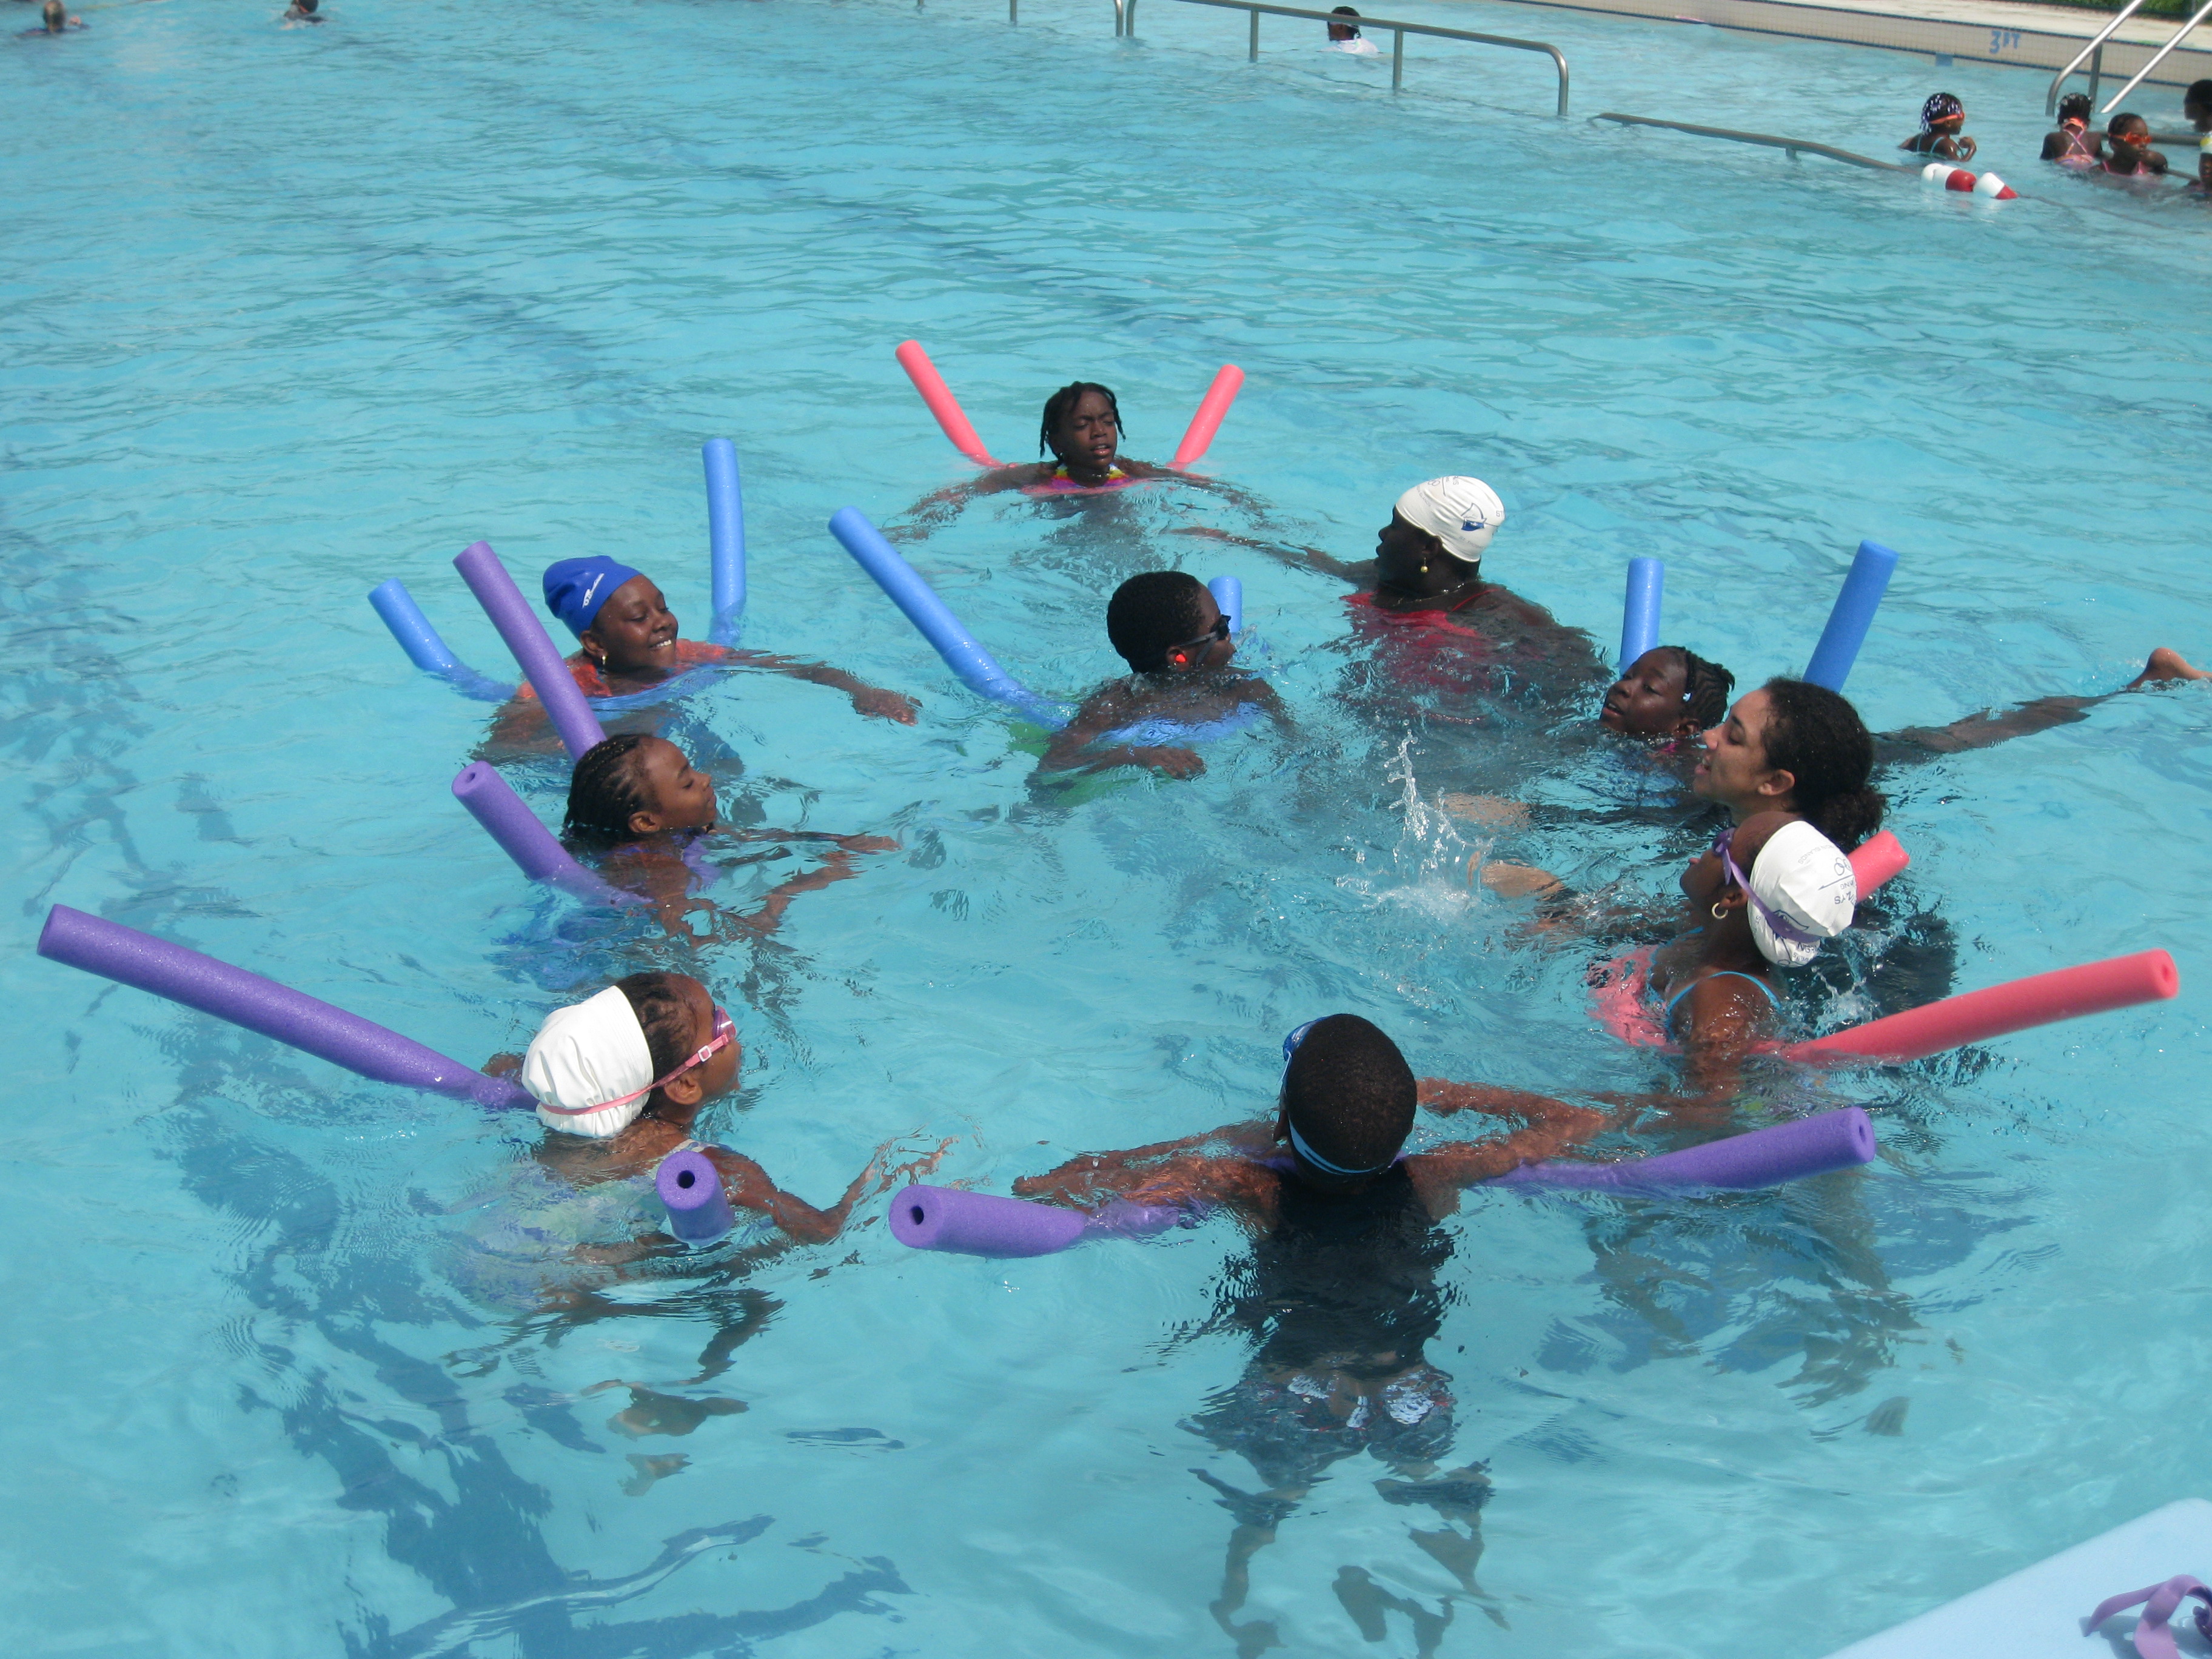 STSA swim instructor utilizes noodles to practice floating techniques in the water.